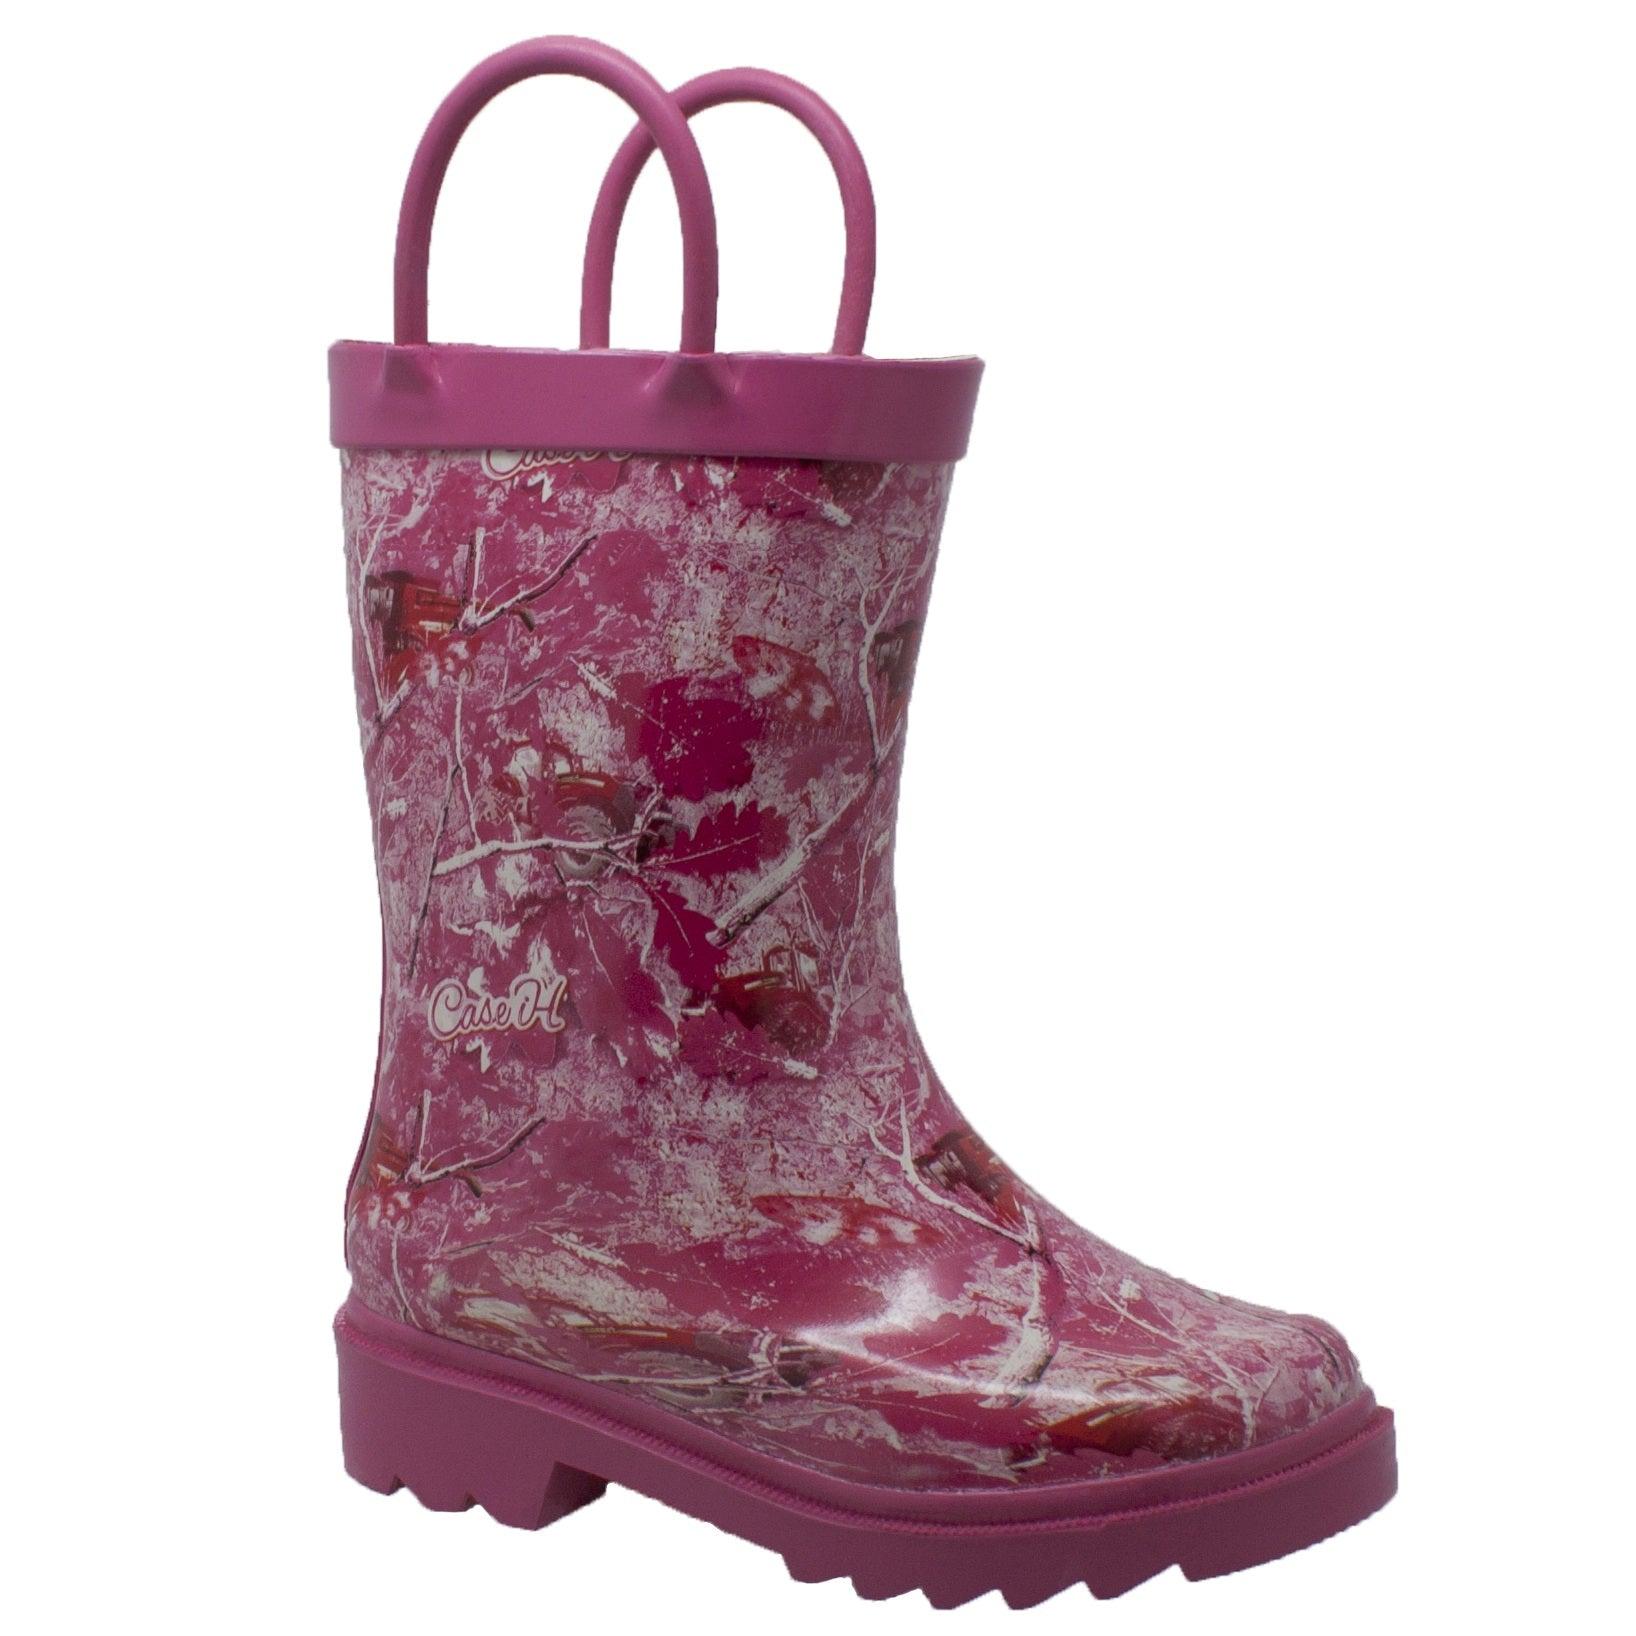 Case IH Toddler's Camo Rubber Boot Pink - Flyclothing LLC